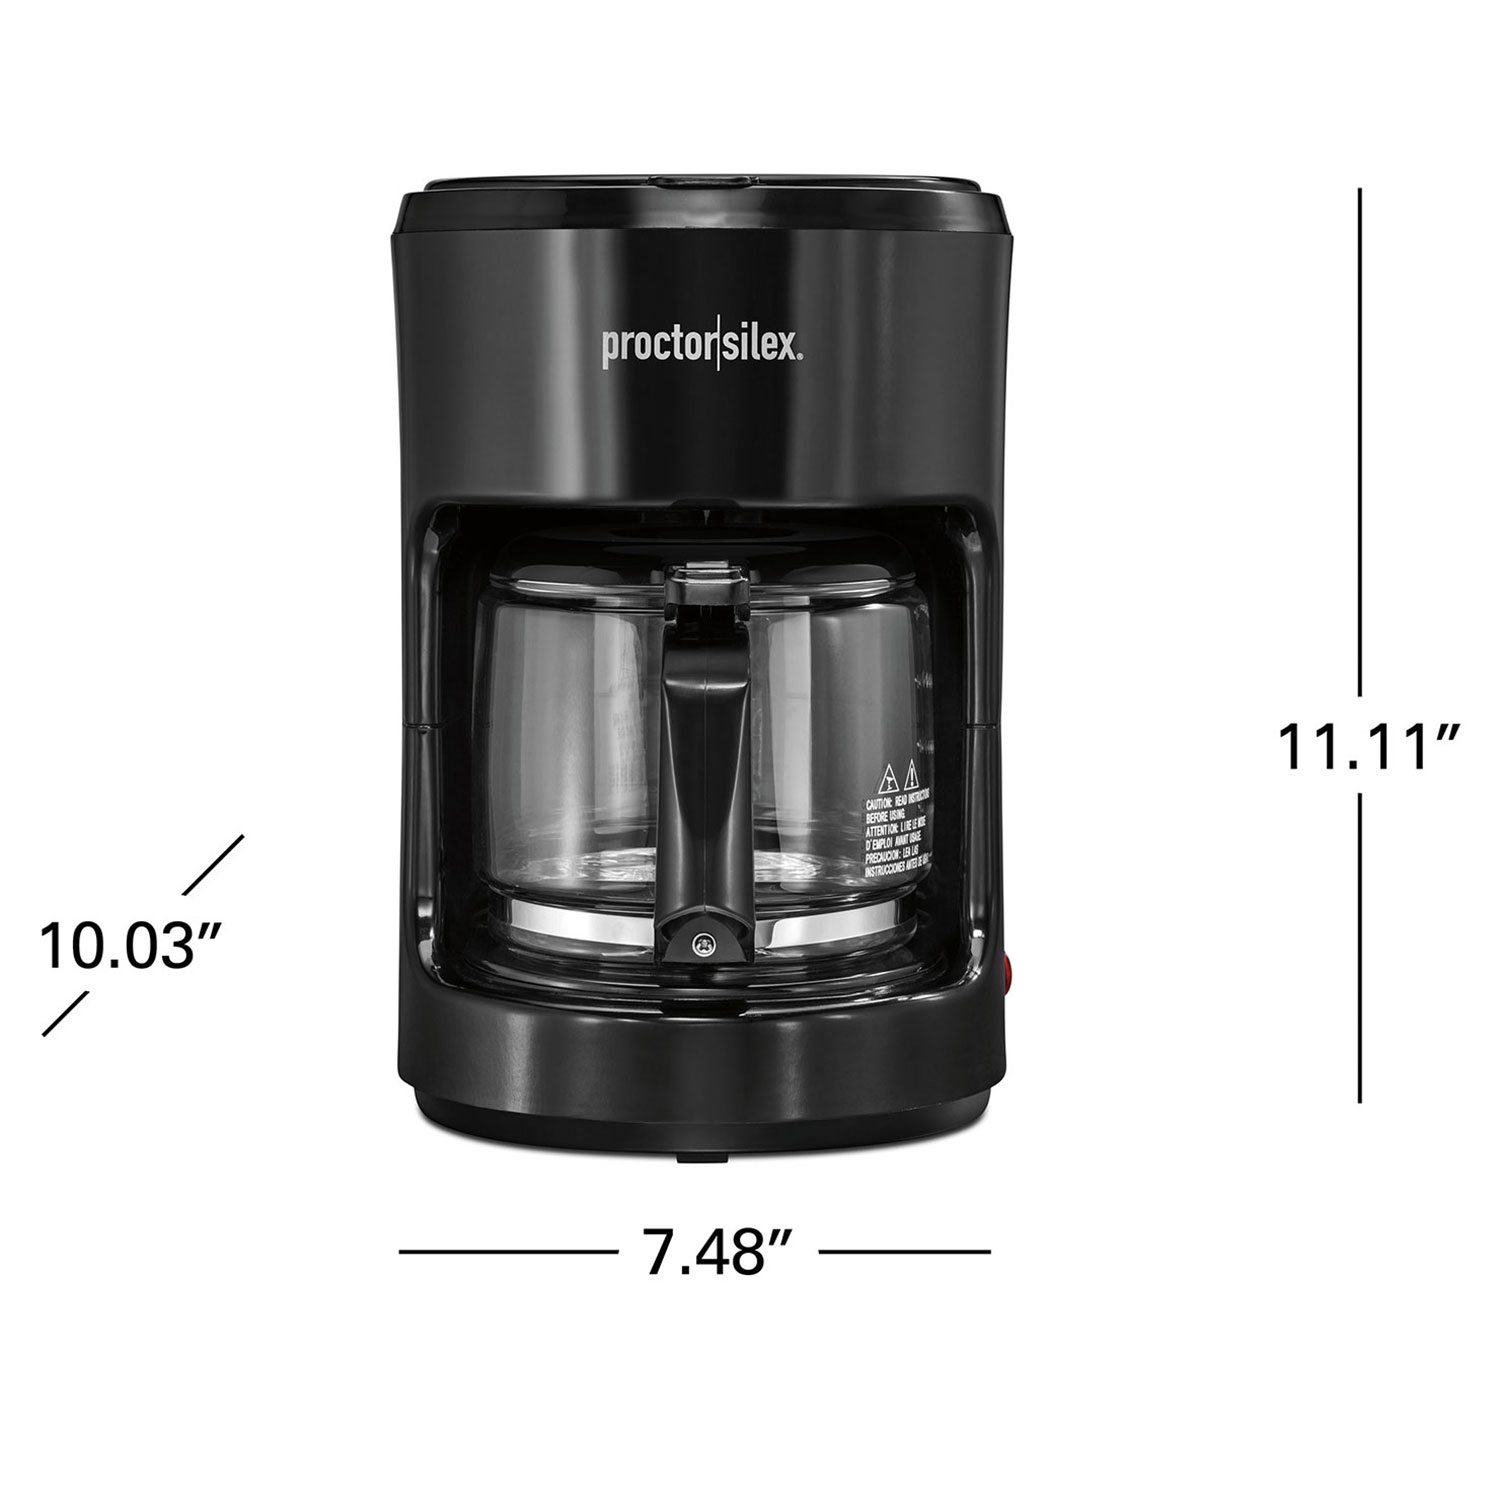  Proctor Silex 12-Cup Coffee Maker, Works with Smart Plugs That  Are Compatible with Alexa, Auto Pause and Serve, White (43501PS): Drip  Coffeemakers: Home & Kitchen